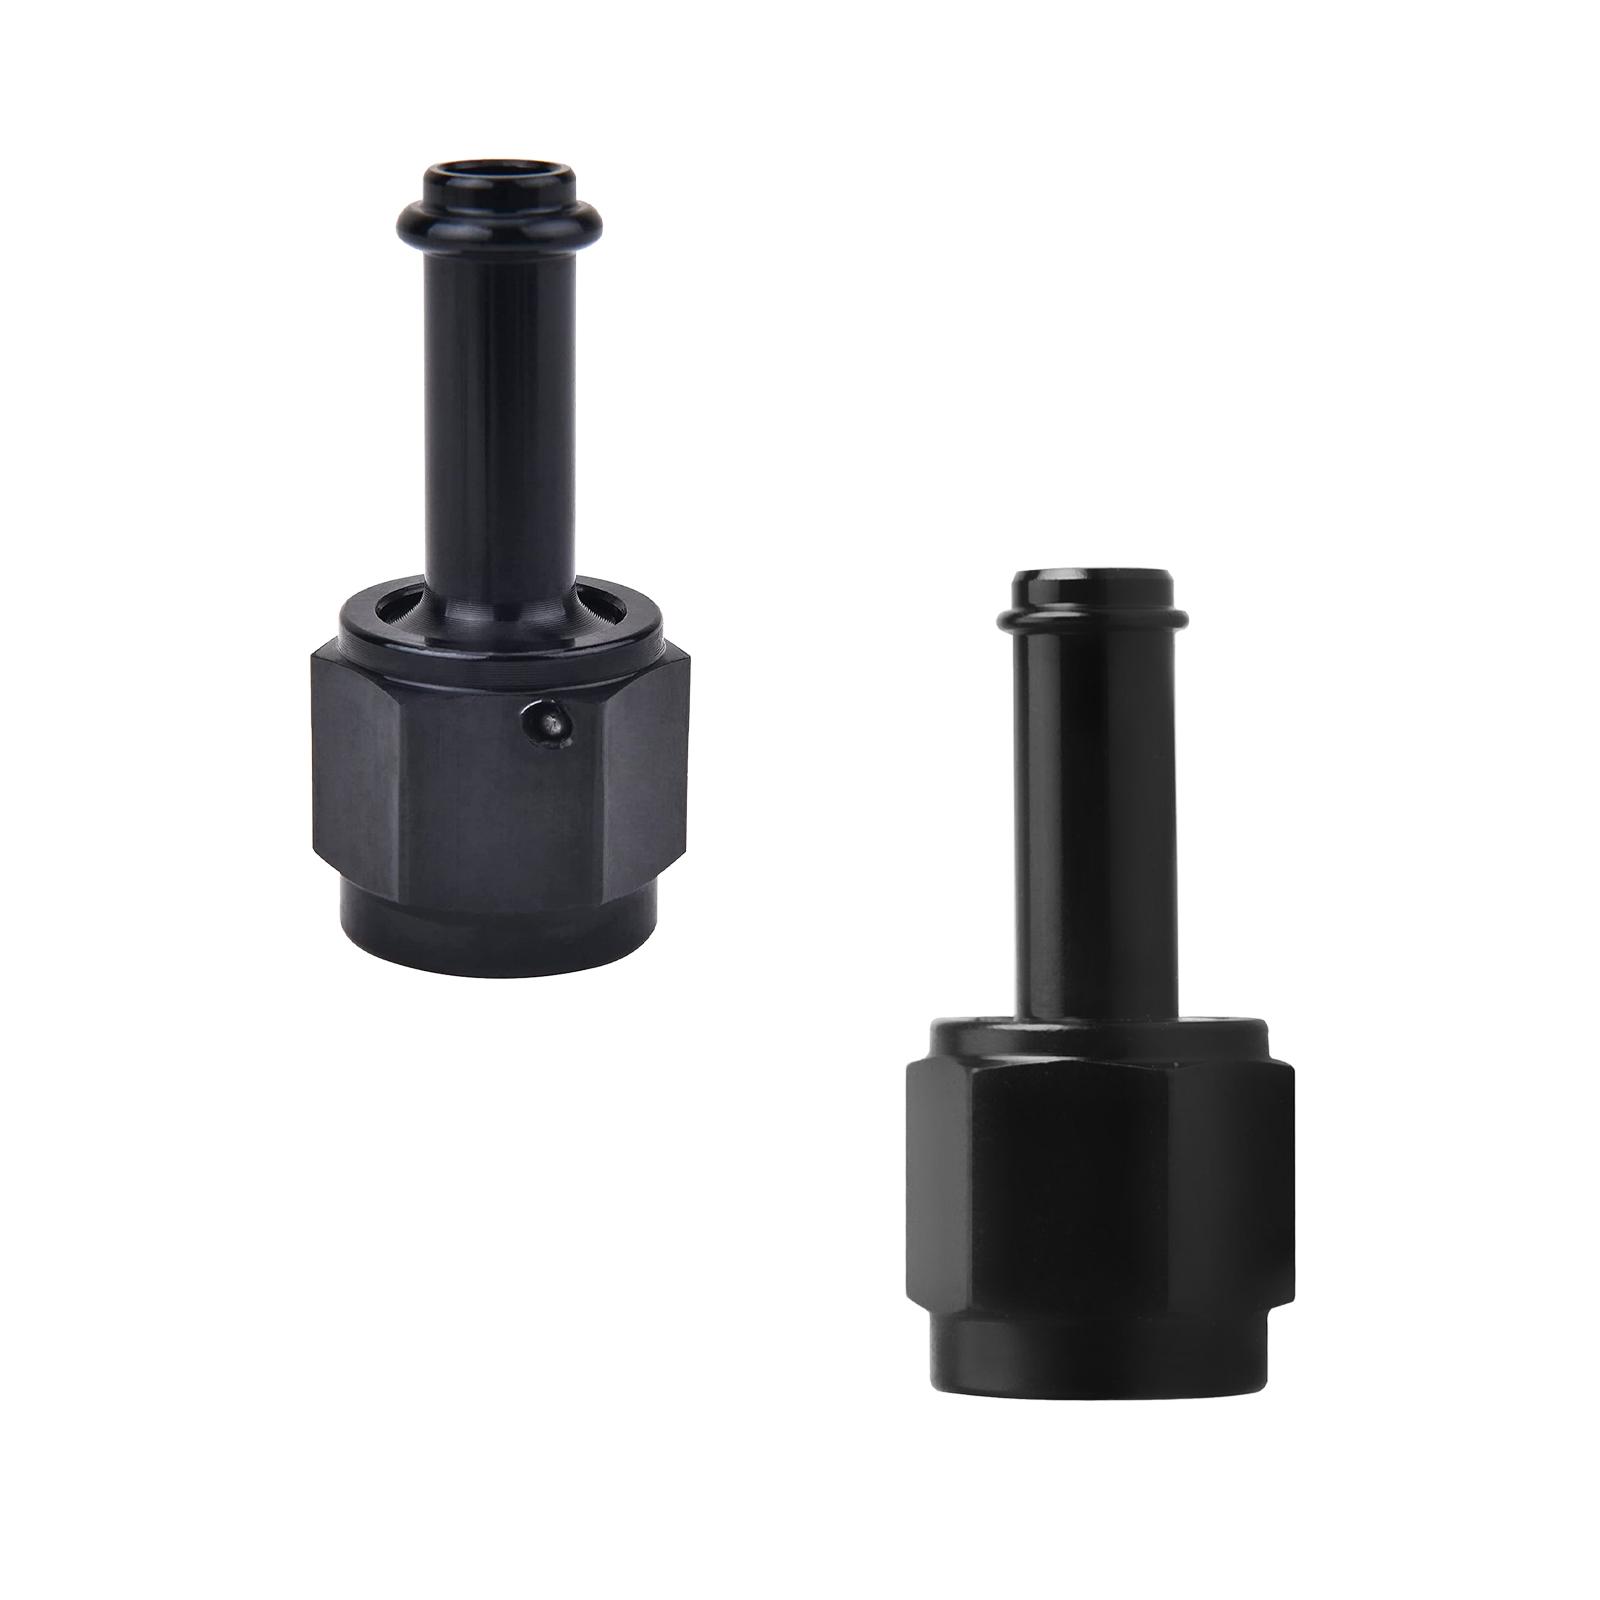 6AN Female Swivel Barb Fitting Aluminum Black Part Fuel Hose Fitting Adapter AN6 to 5 16